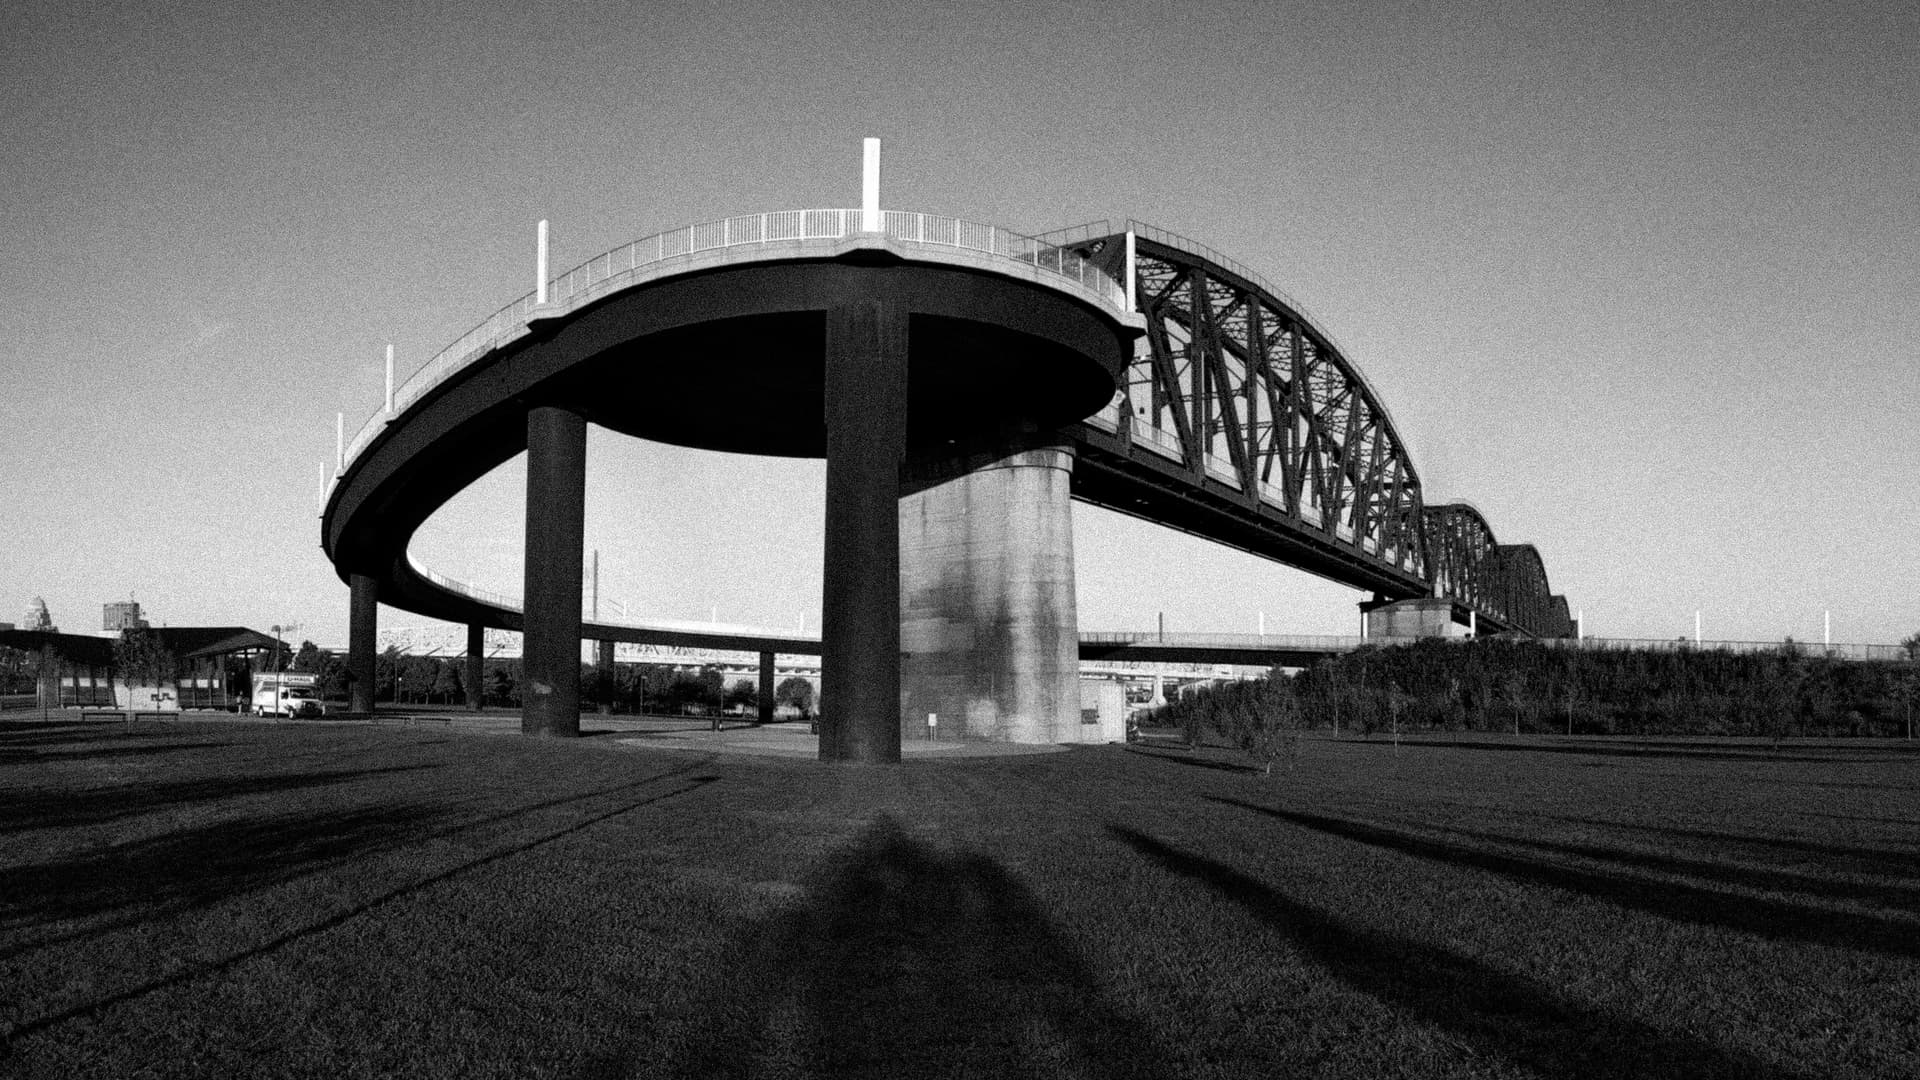 The spiral pedestrian ramp leading on to a steel footbridge crossing the Ohio River.